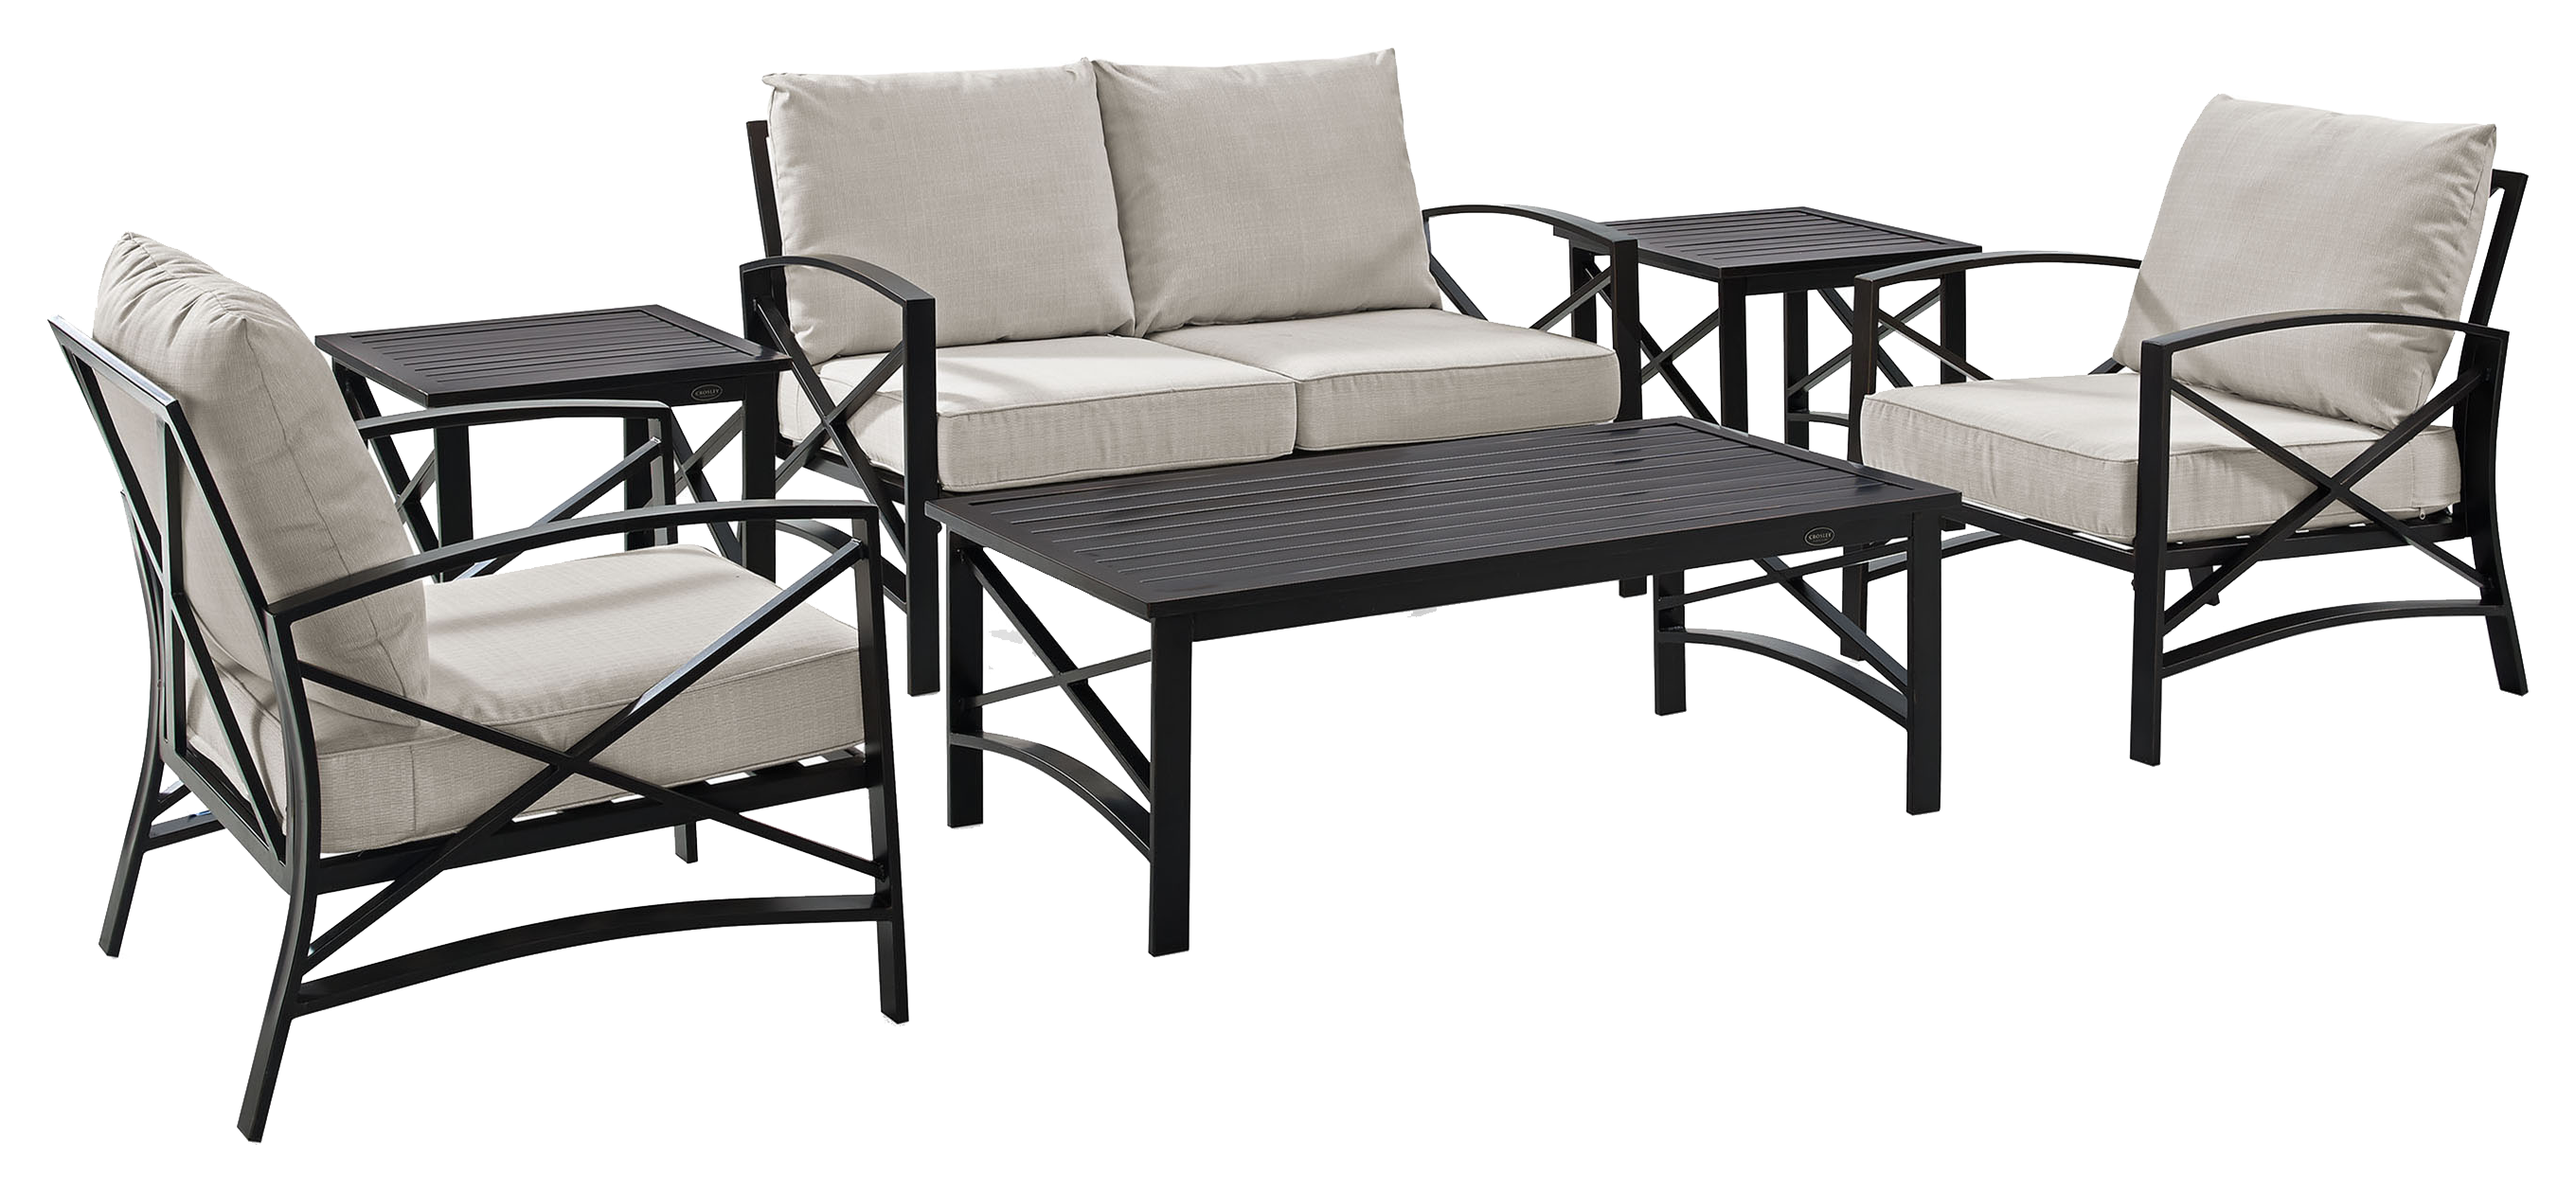 Crosley Kaplan Loveseat, Armchairs, And Tables 6 Piece Outdoor Metal Patio Furniture Set Oatmeal